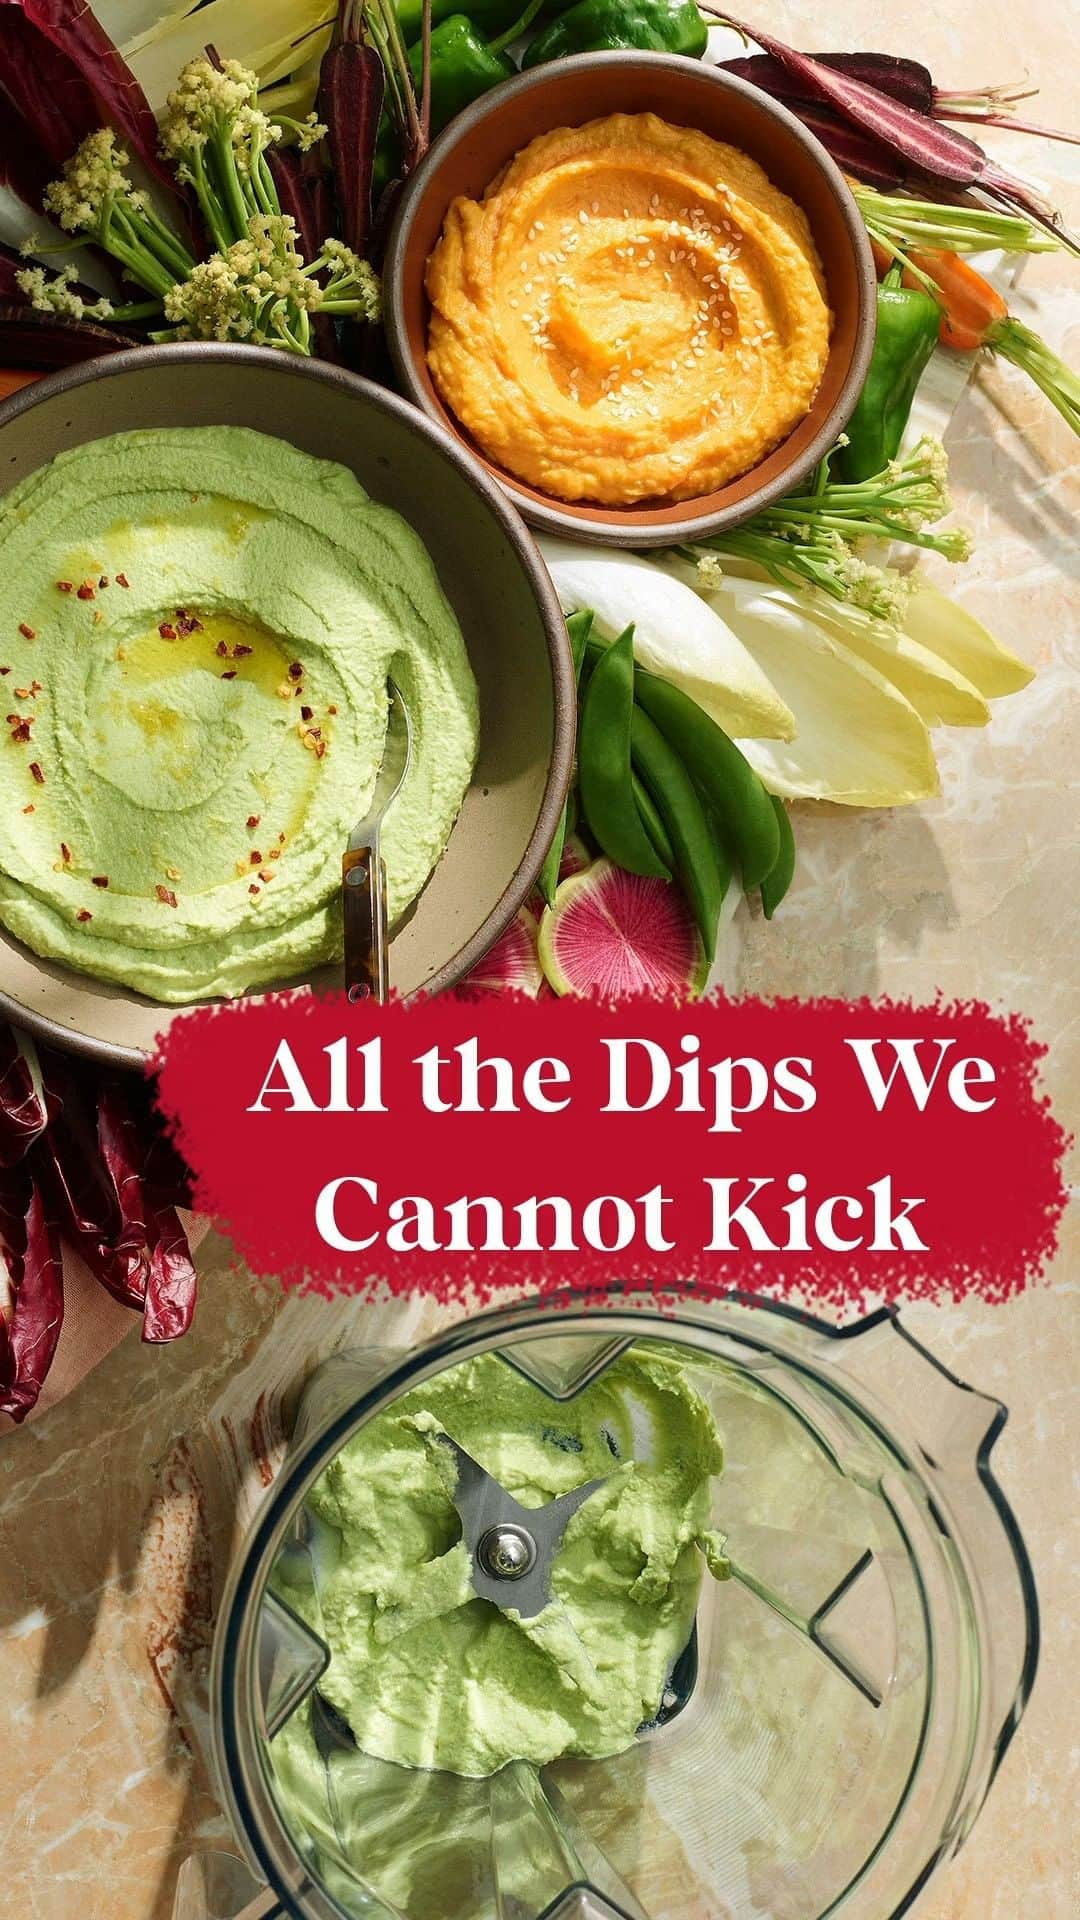 Vitamix Global Headquarters Real foodのインスタグラム：「Football season is here and you guys have made our favorite dips we cannot kick!  Check out each recipe at the handle below. Cilantro Lime Avocado Hummus - @madewithlovelace Kalamata Olive Hummus - @veganguysfromohio Red Pepper Hummus - @abiteofthislife Salsa Verde - @lowsorecipes」